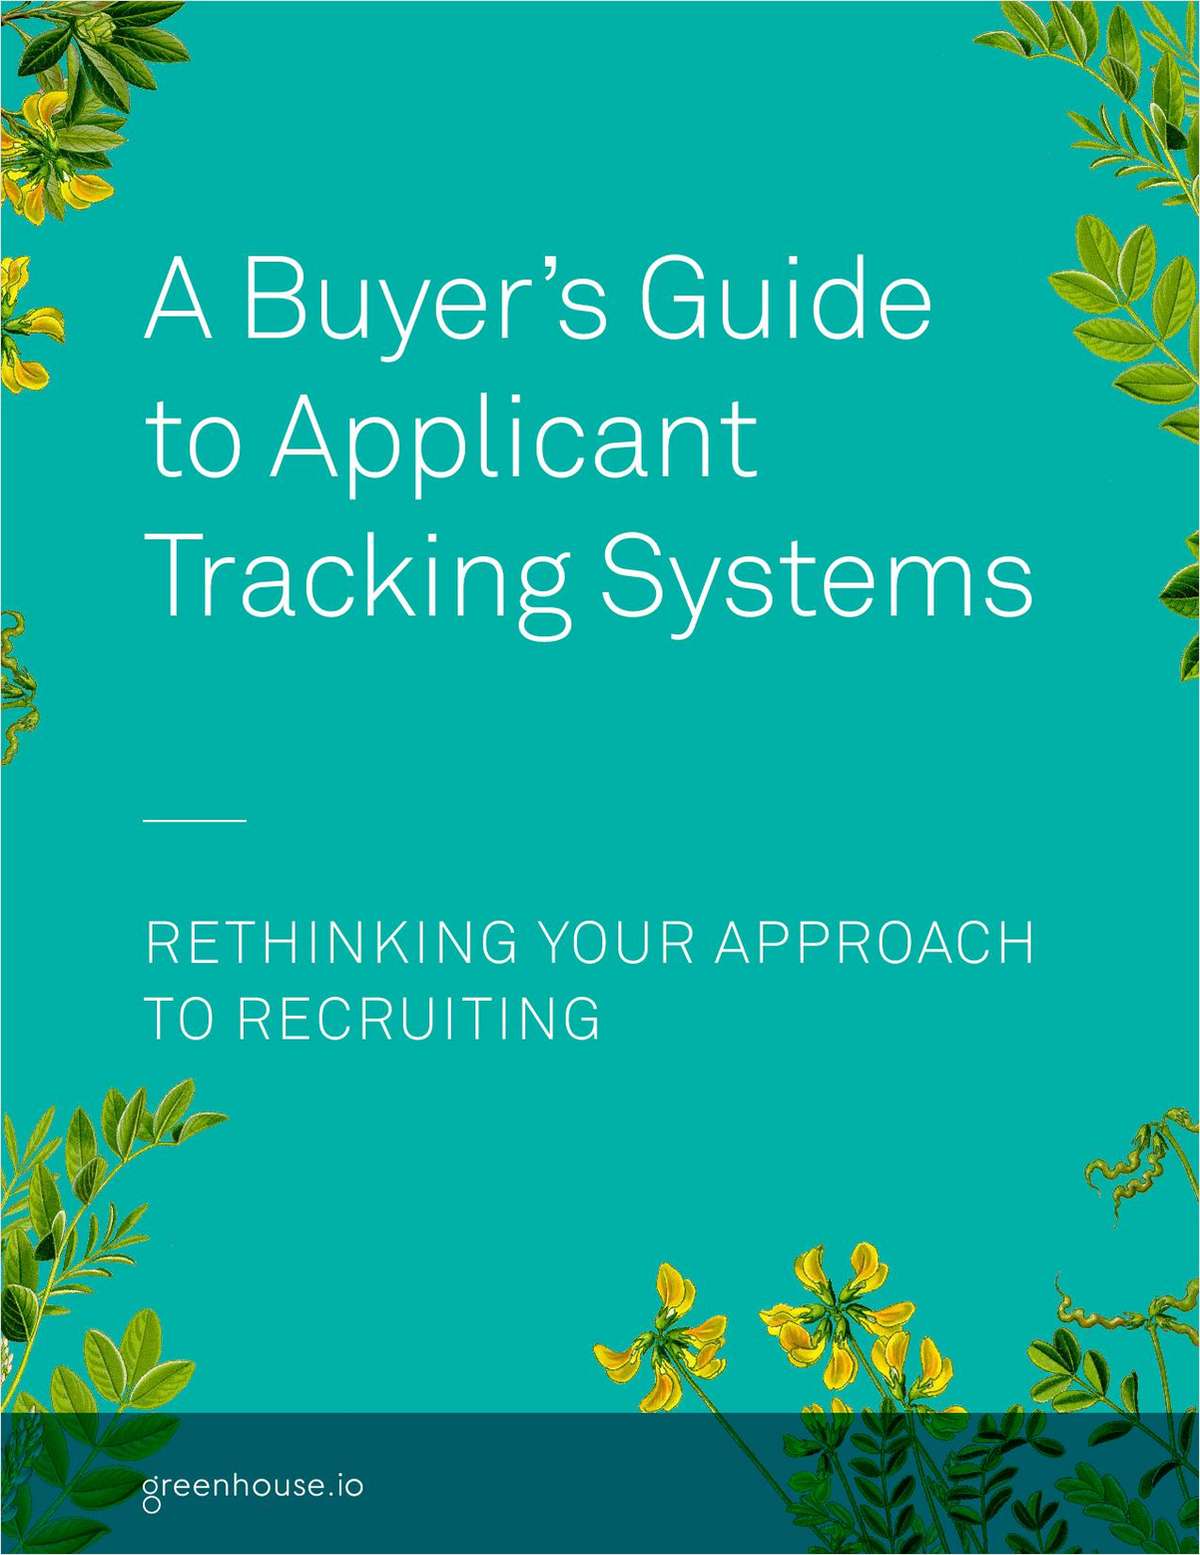 A Buyer's Guide for a Modern Applicant Tracking System